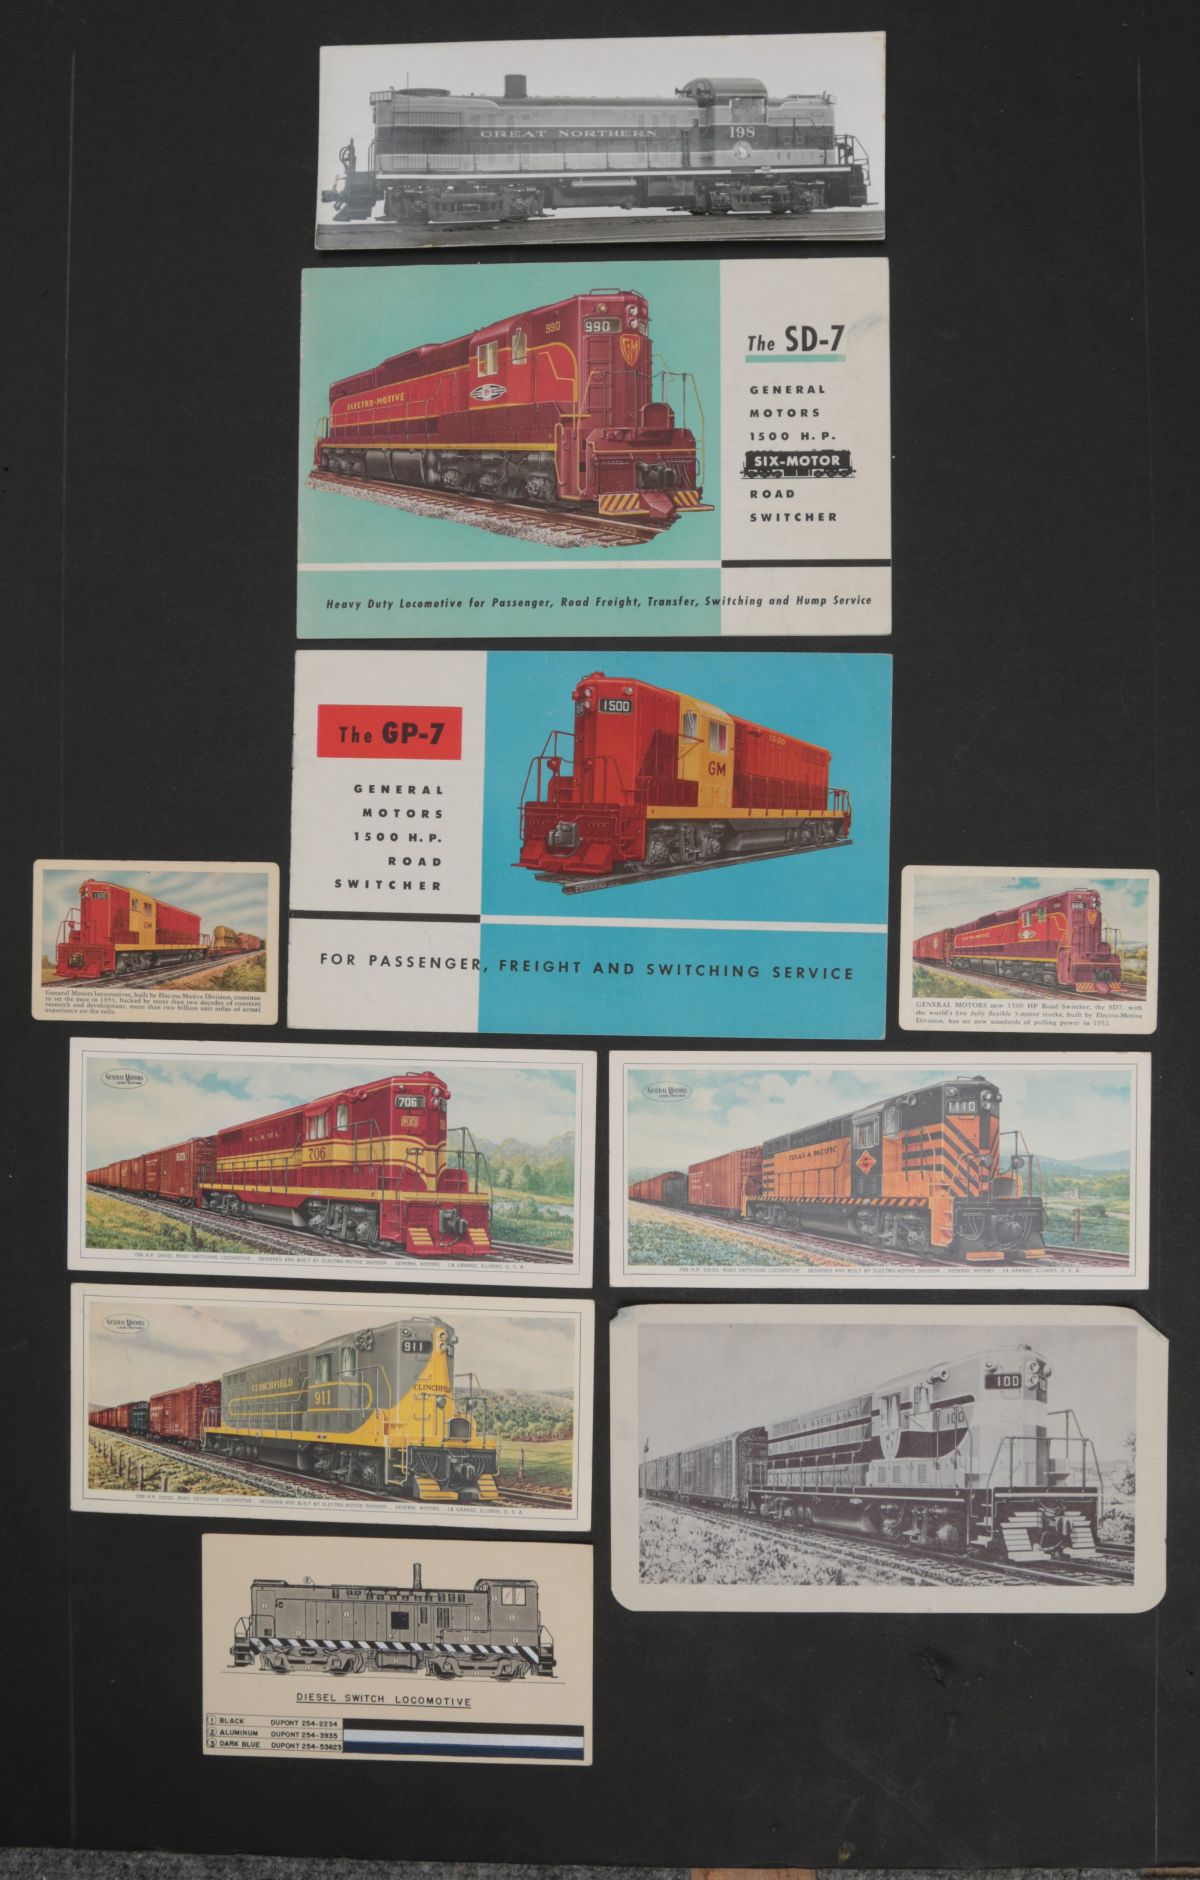 GM'S SD-7 AND GP-7 SWITCHER ADVERTISING MATERIALS